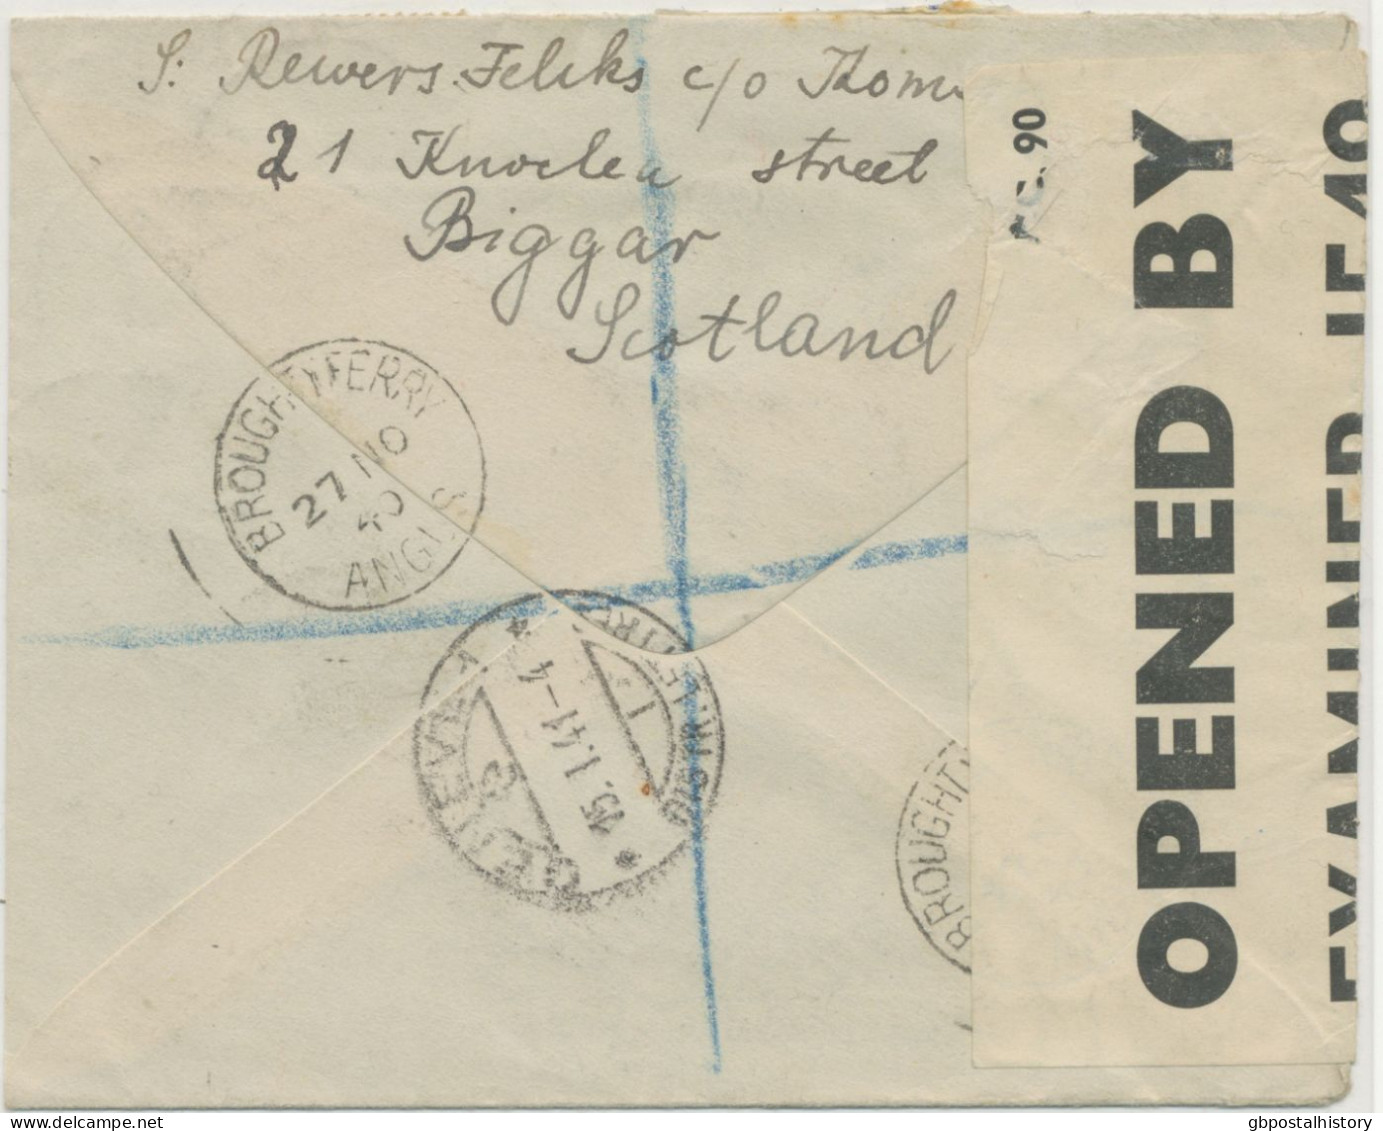 GB 1940, GVI 1d, 2½d (2x) And 5d On Registered Air Mail Cover With Rare CDS „BROUGHTY FERRY / ANGUS“ (now DUNDEE) - Entiers Postaux